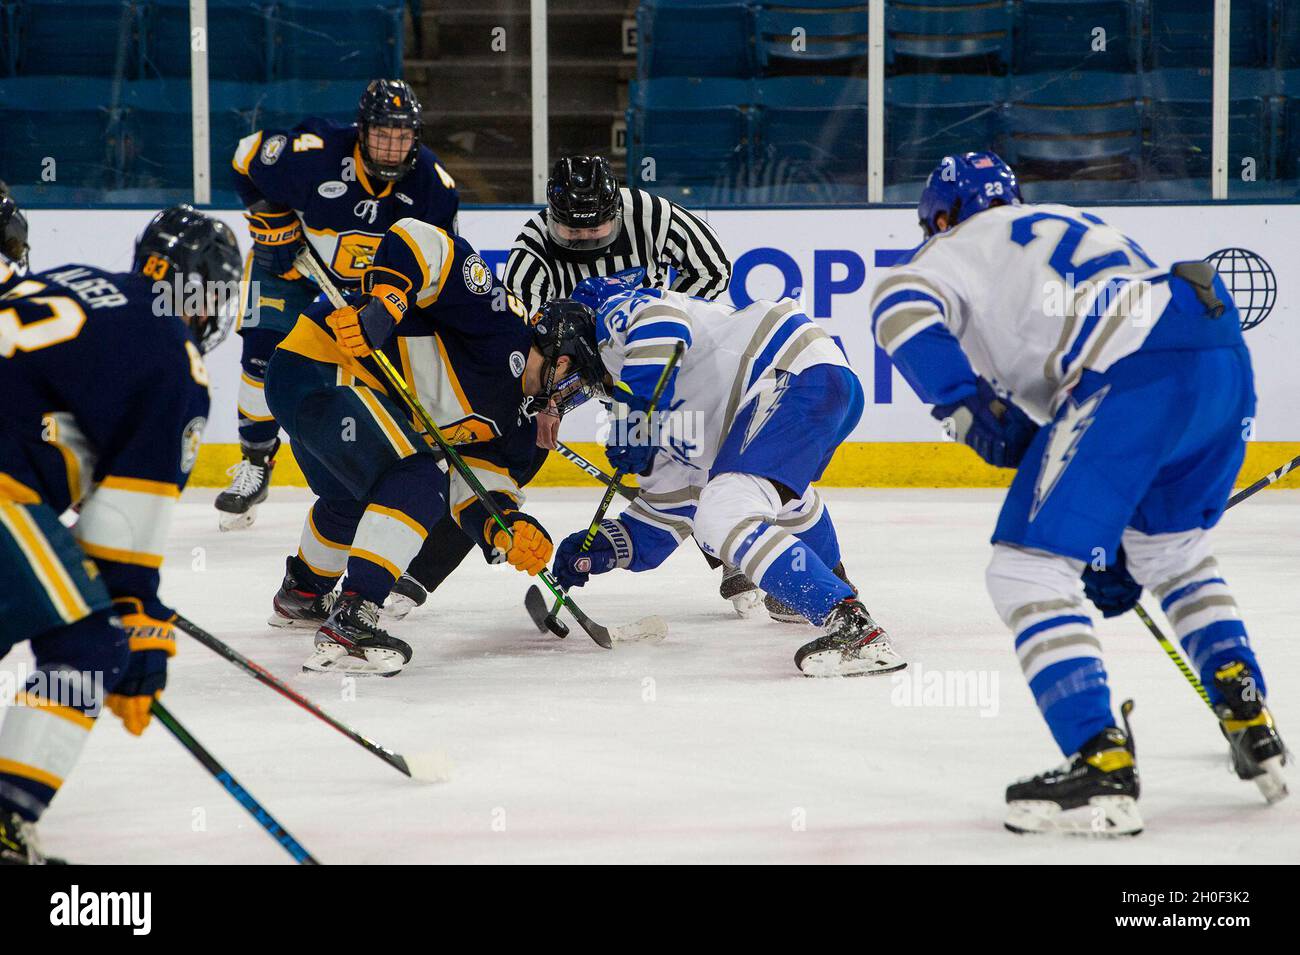 U.S. AIR FORCE ACADEMY, Colo. -- Air Force forward Thomas Daskas faces off against Canisius College forward Matt Long during a home game at the Academy’s Cadet Ice Arena, Feb. 20, 2021. Air Force defeats Canisius 5-1. Stock Photo